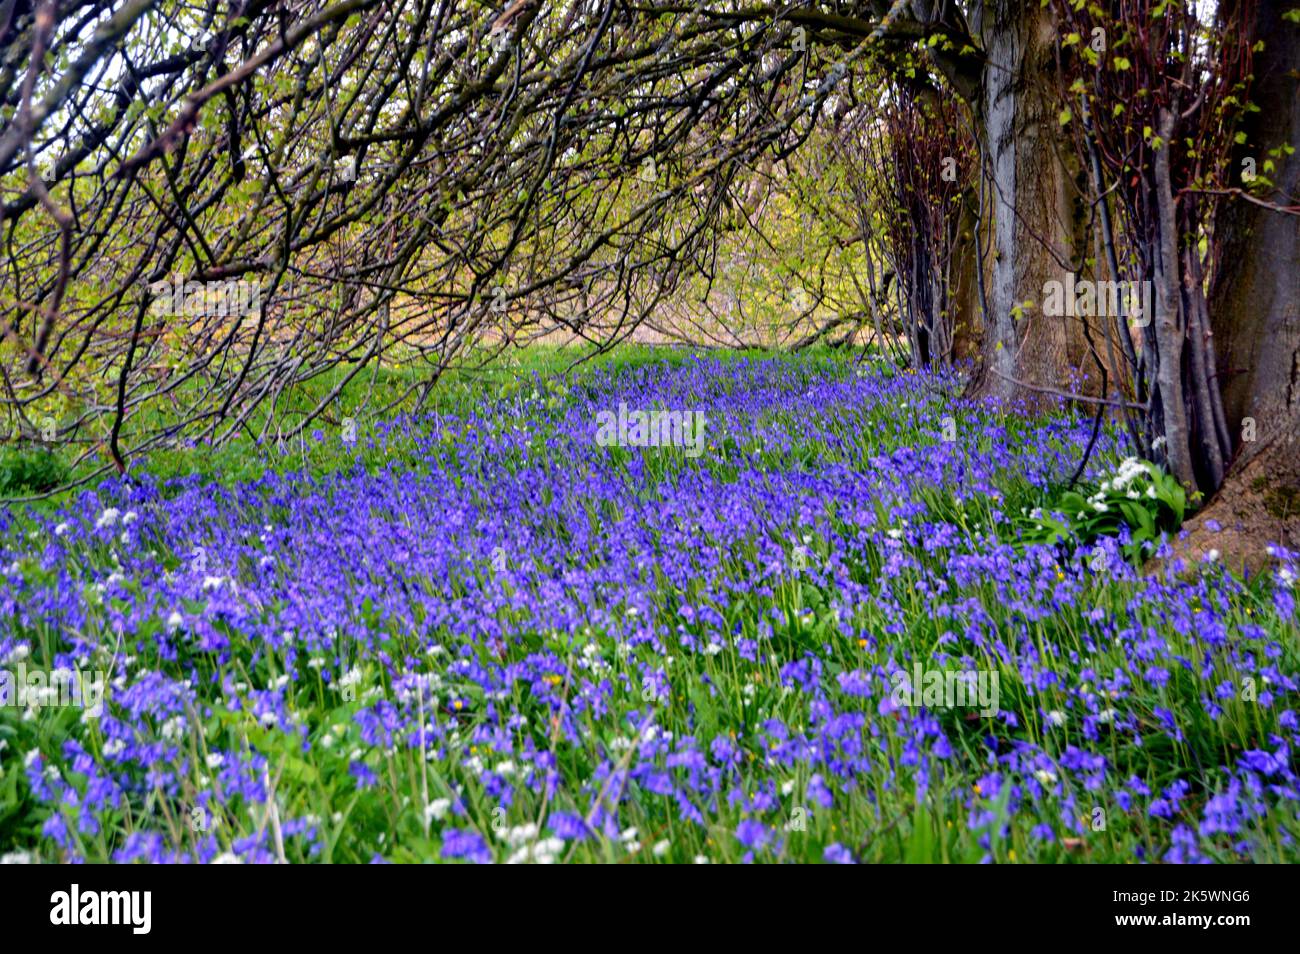 Carpet of Common Bluebells under a Canopy of Trees on the Edge of the Wildflower Meadow at Holker Hall & Gardens, Lake District, Cumbria, England, UK. Stock Photo